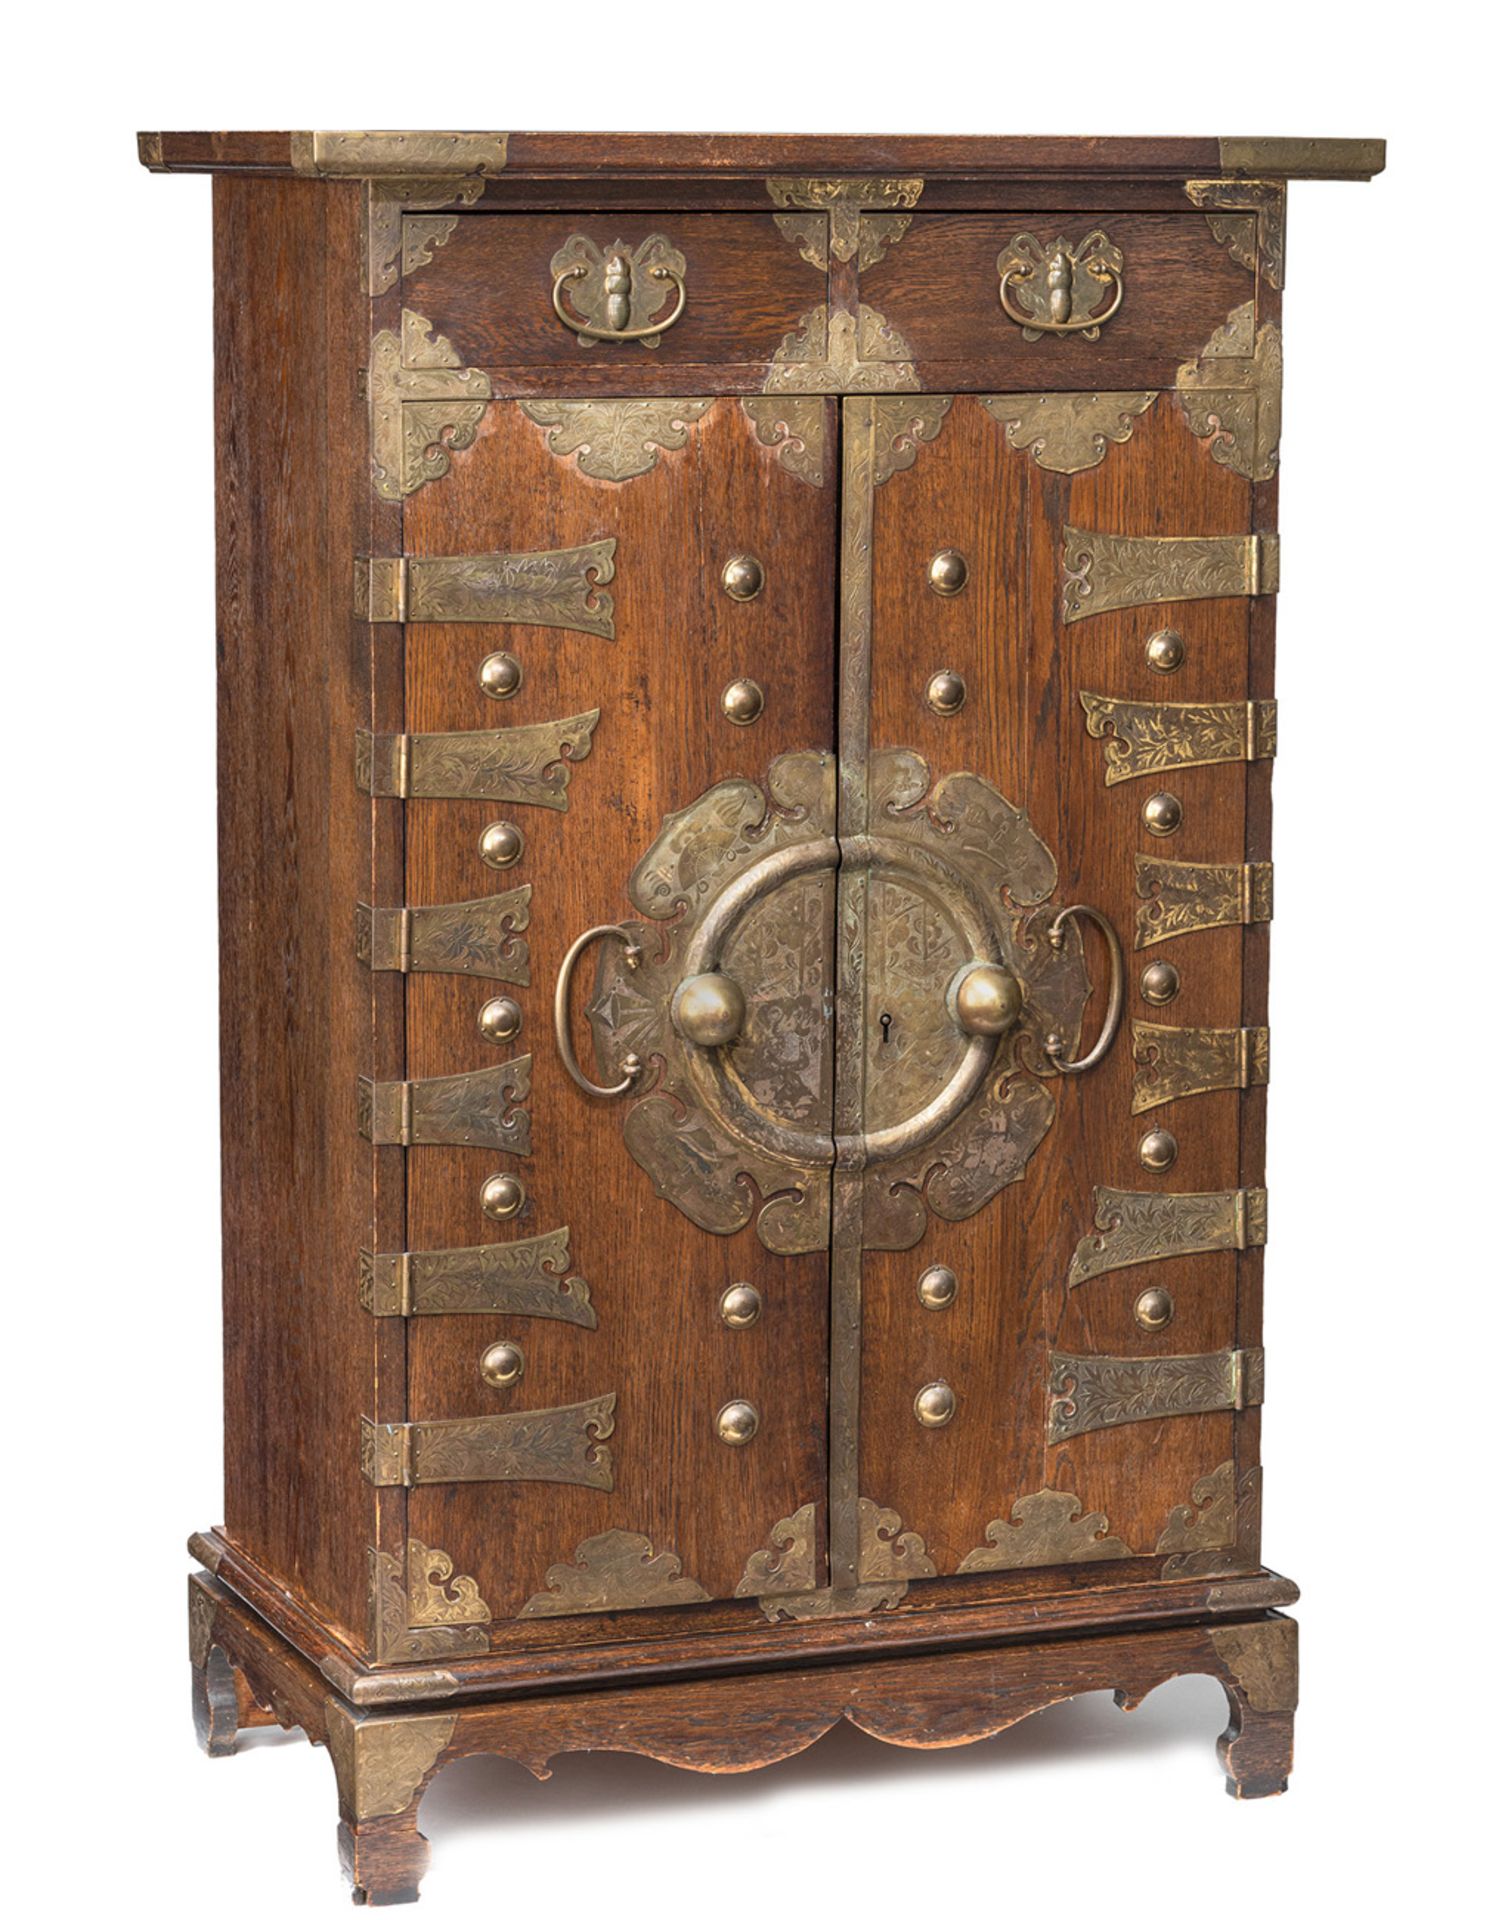 A TWO-DOOR BRASS FITTED WOOD CABINET